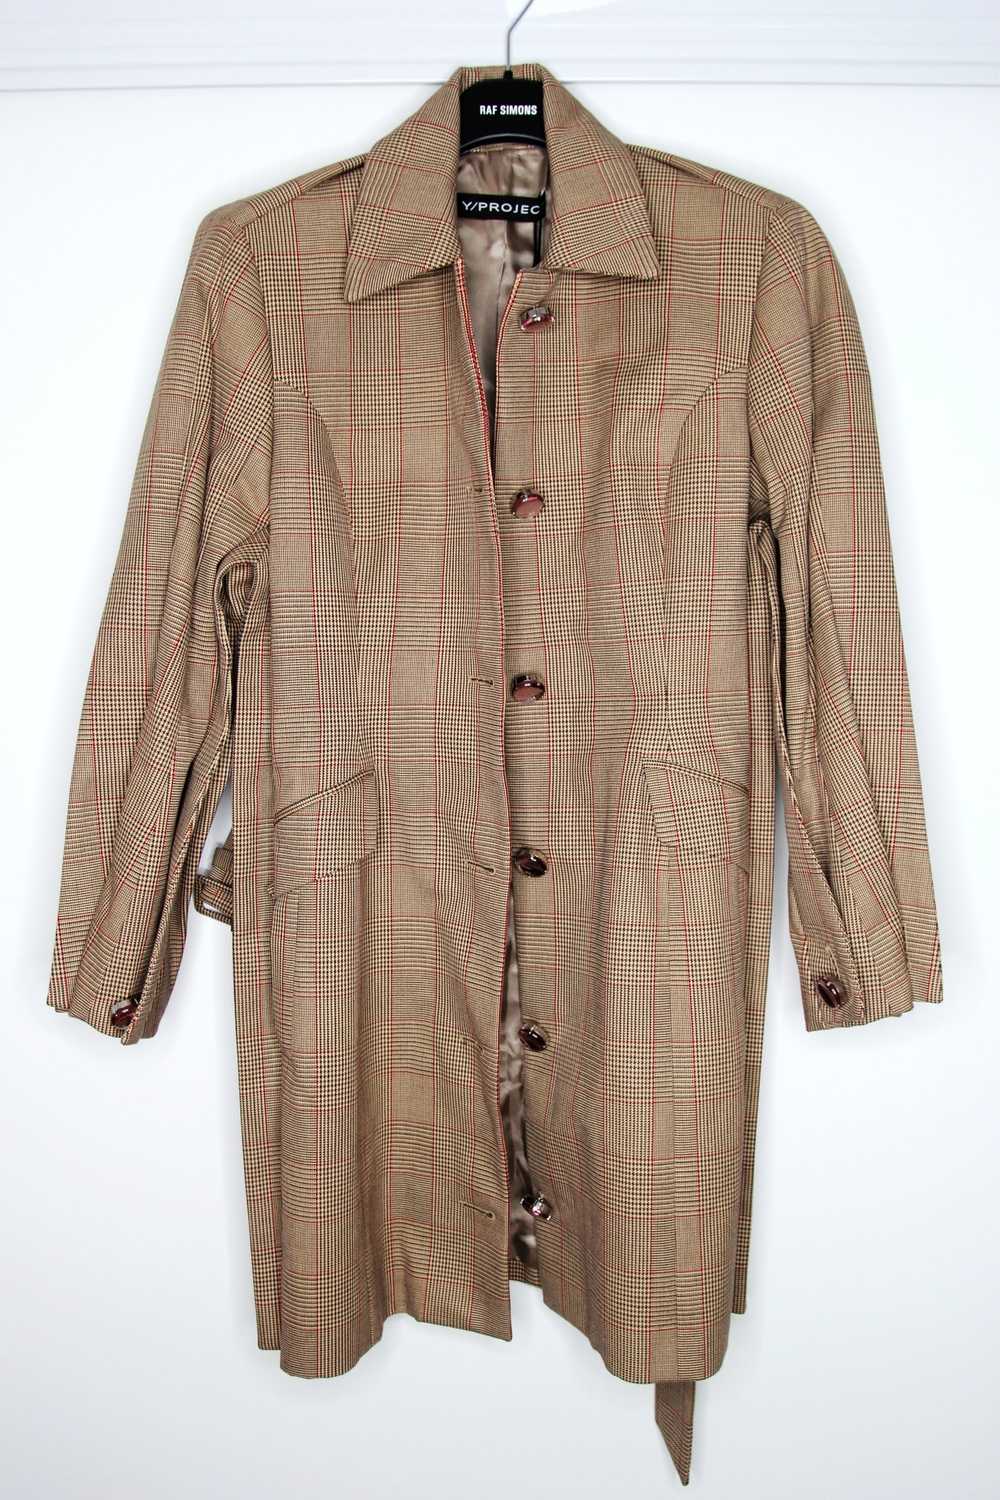 Y/Project SS19 Y/PROJECT PLAID PRINT TRENCH COAT L - image 3